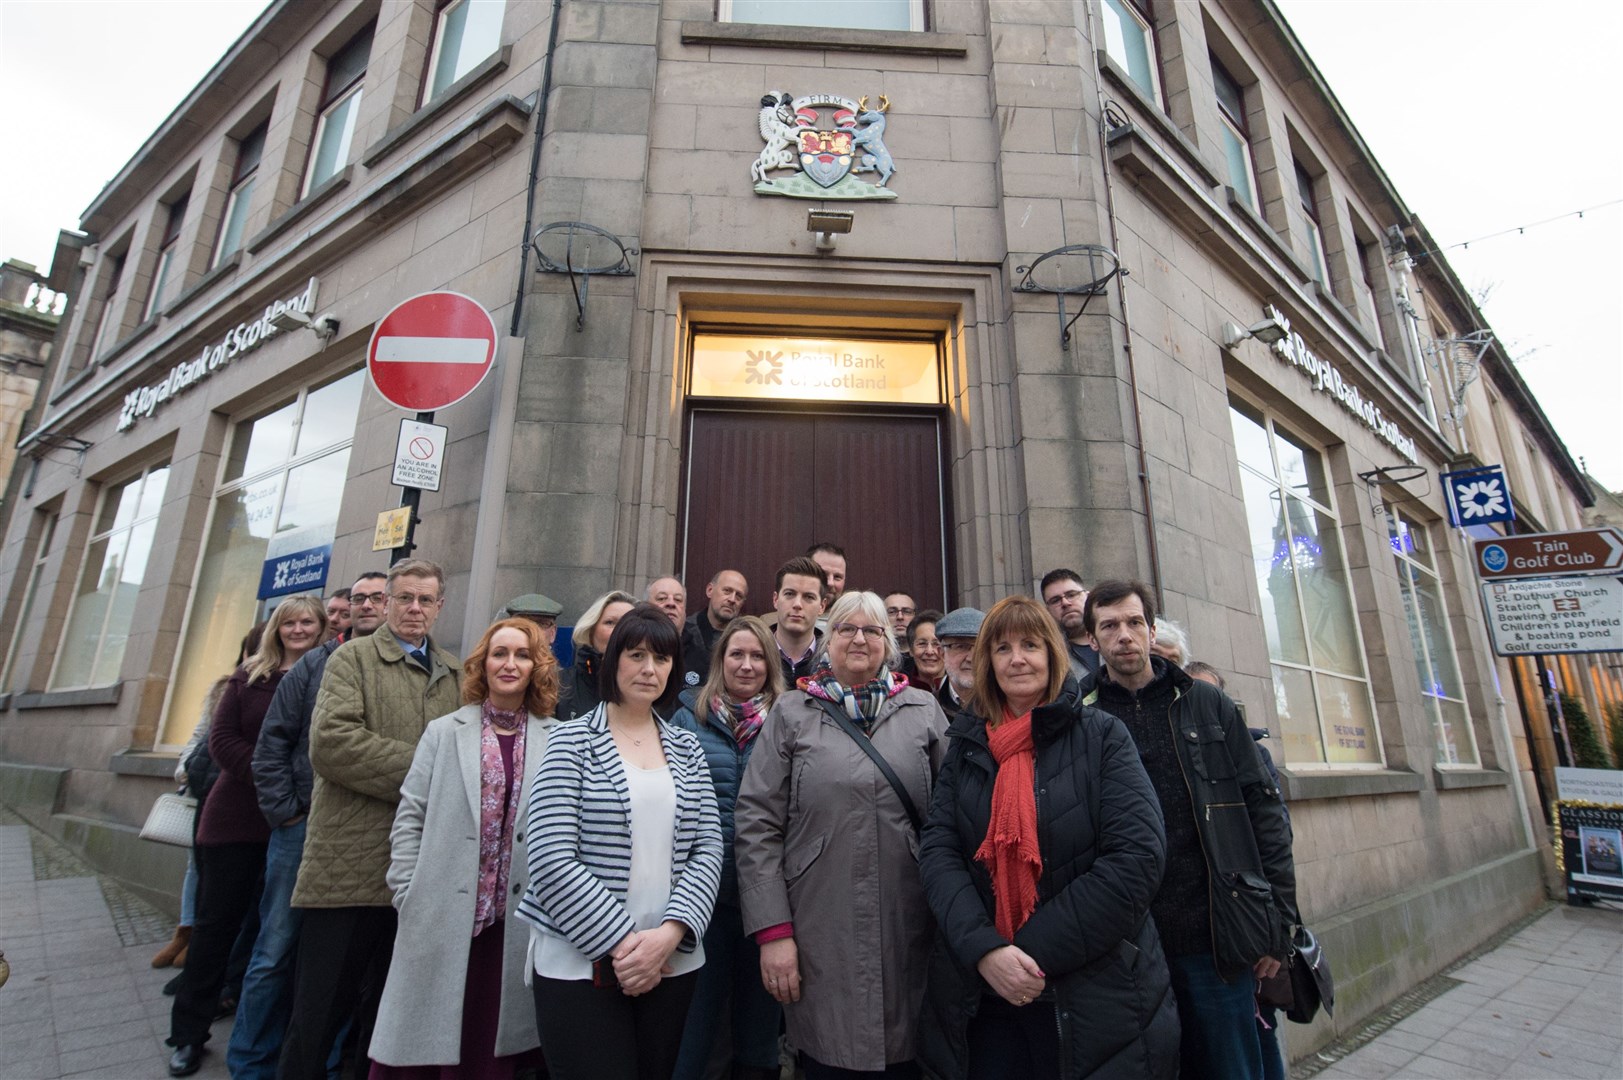 People were unhappy at the decision to close Tain's branch of the Royal Bank of Scotland.